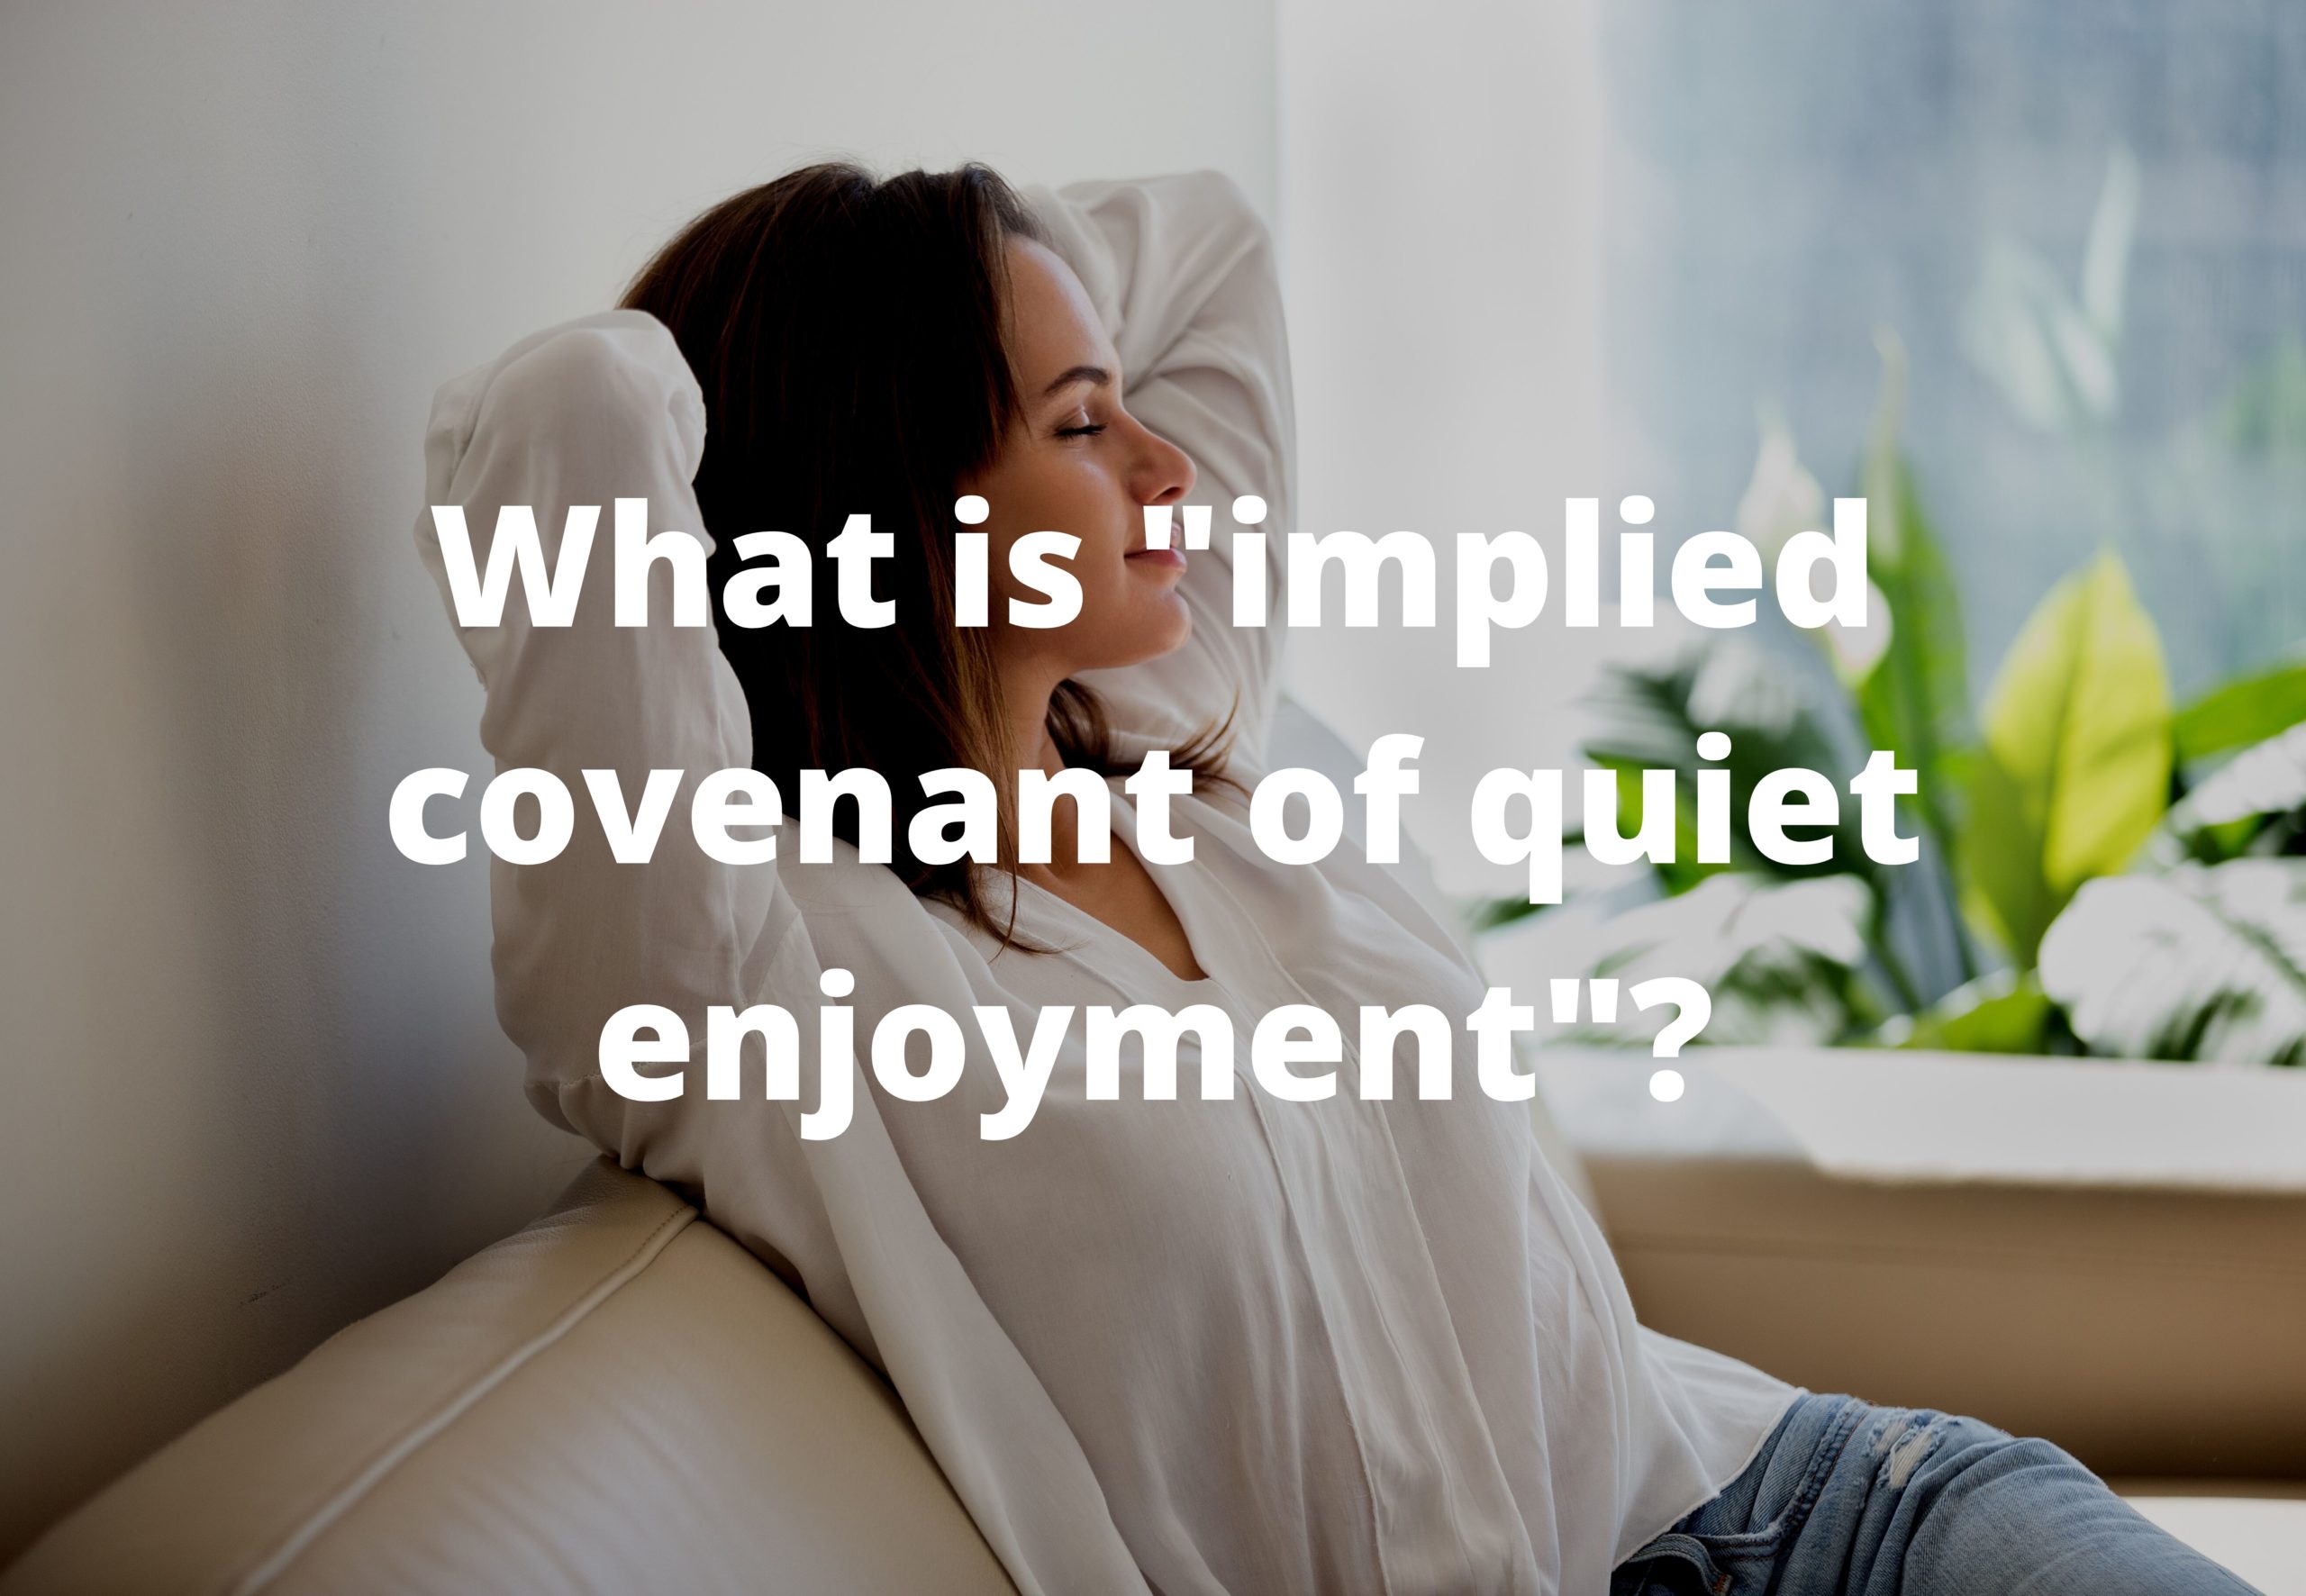 What is implied covenant of quiet enjoyment